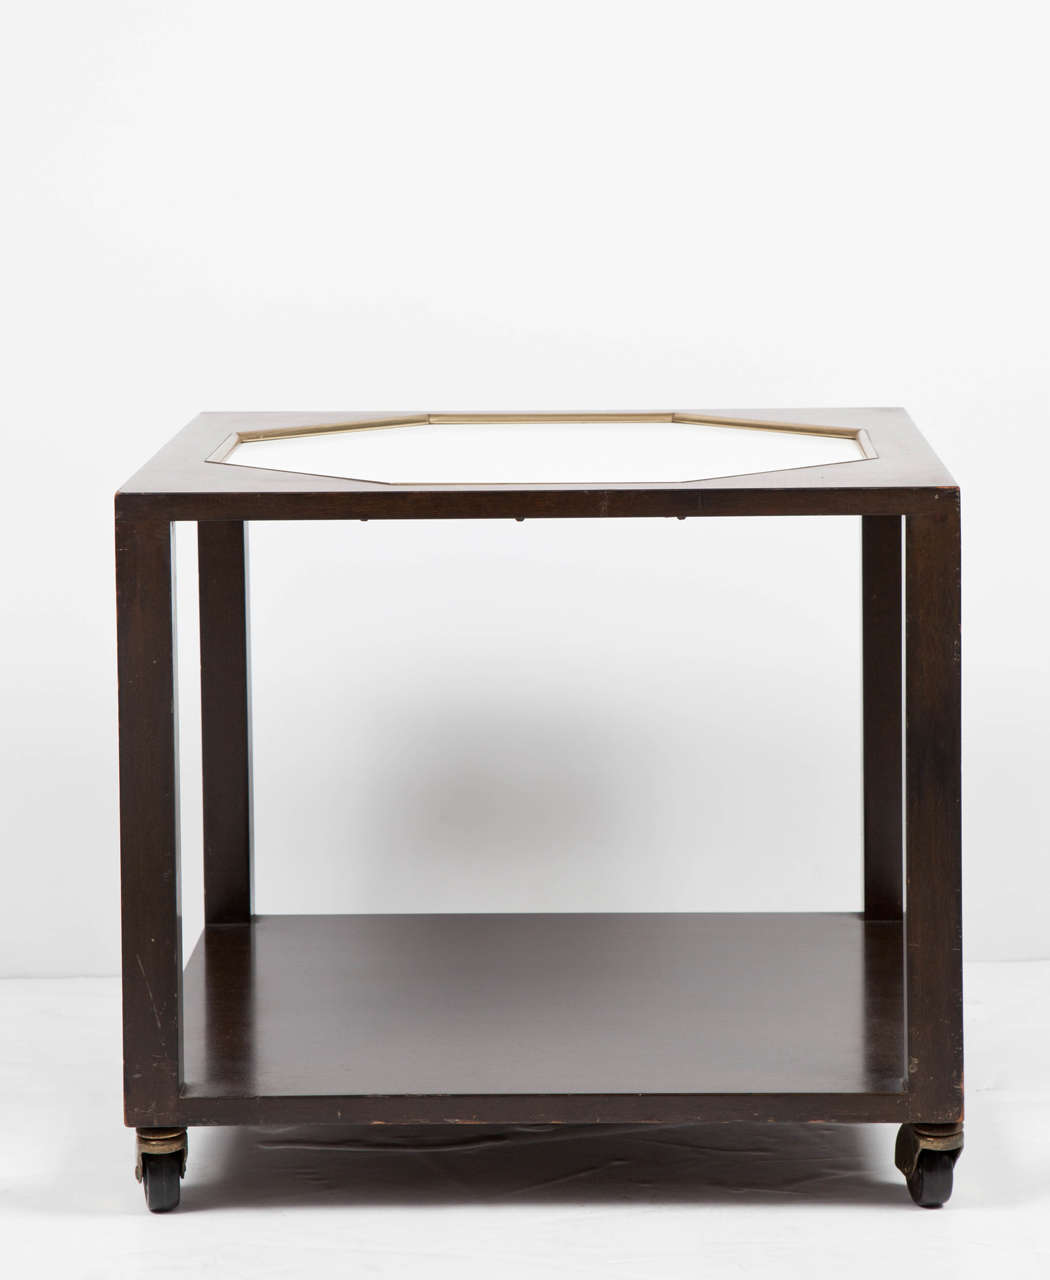 Walnut square-shaped end table with lower shelf, possibly by Harvey Probber. USA, circa 1960. Unsigned. Features a chocolate brown finish with white octagonal inset top with brass trim, complemented by removable casters.